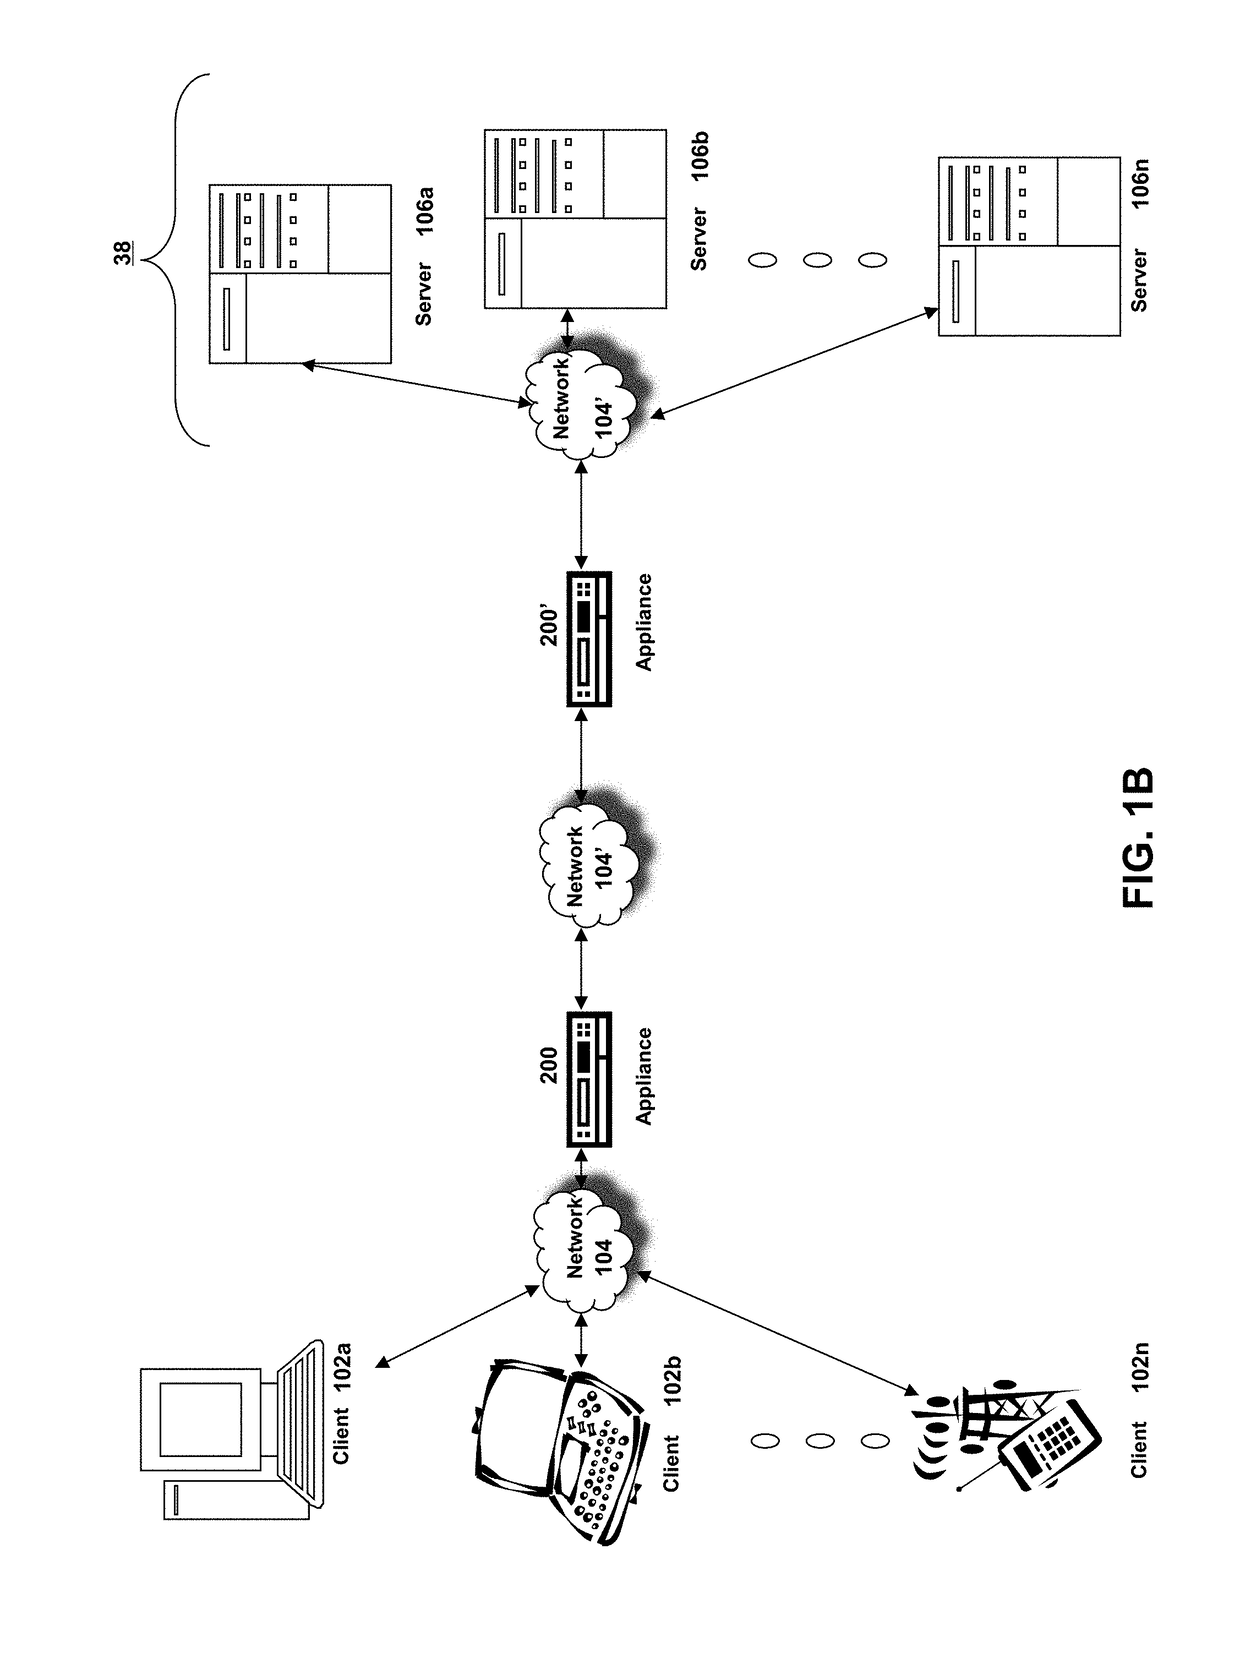 Systems and methods for provisioning network automation by logically separating l2-l3 entities from l4-l7 entities using a software defined network (SDN) controller